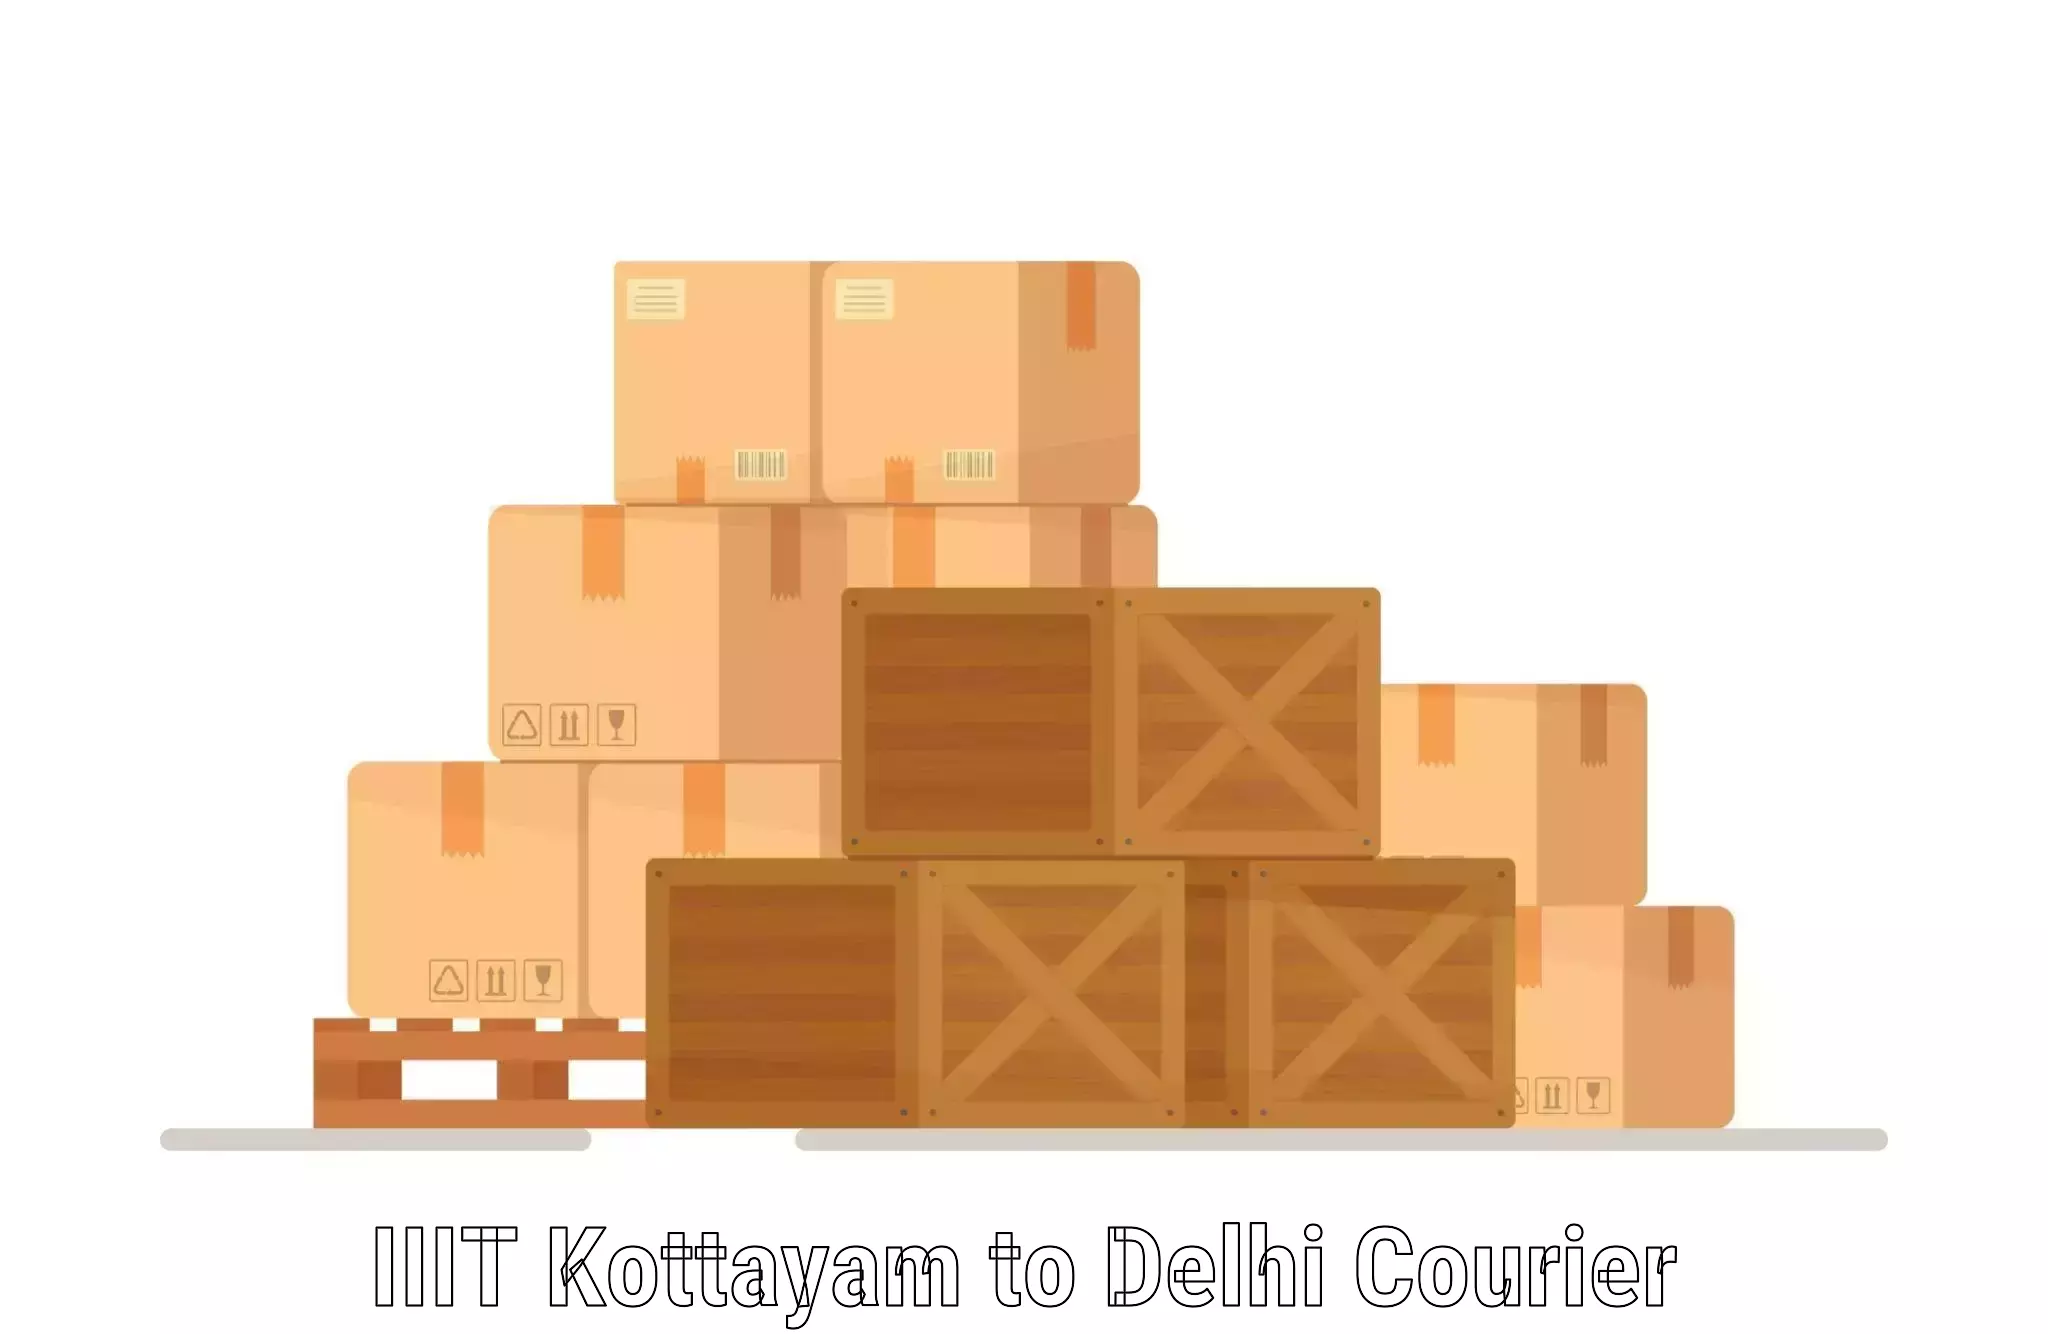 Next-day delivery options IIIT Kottayam to Delhi